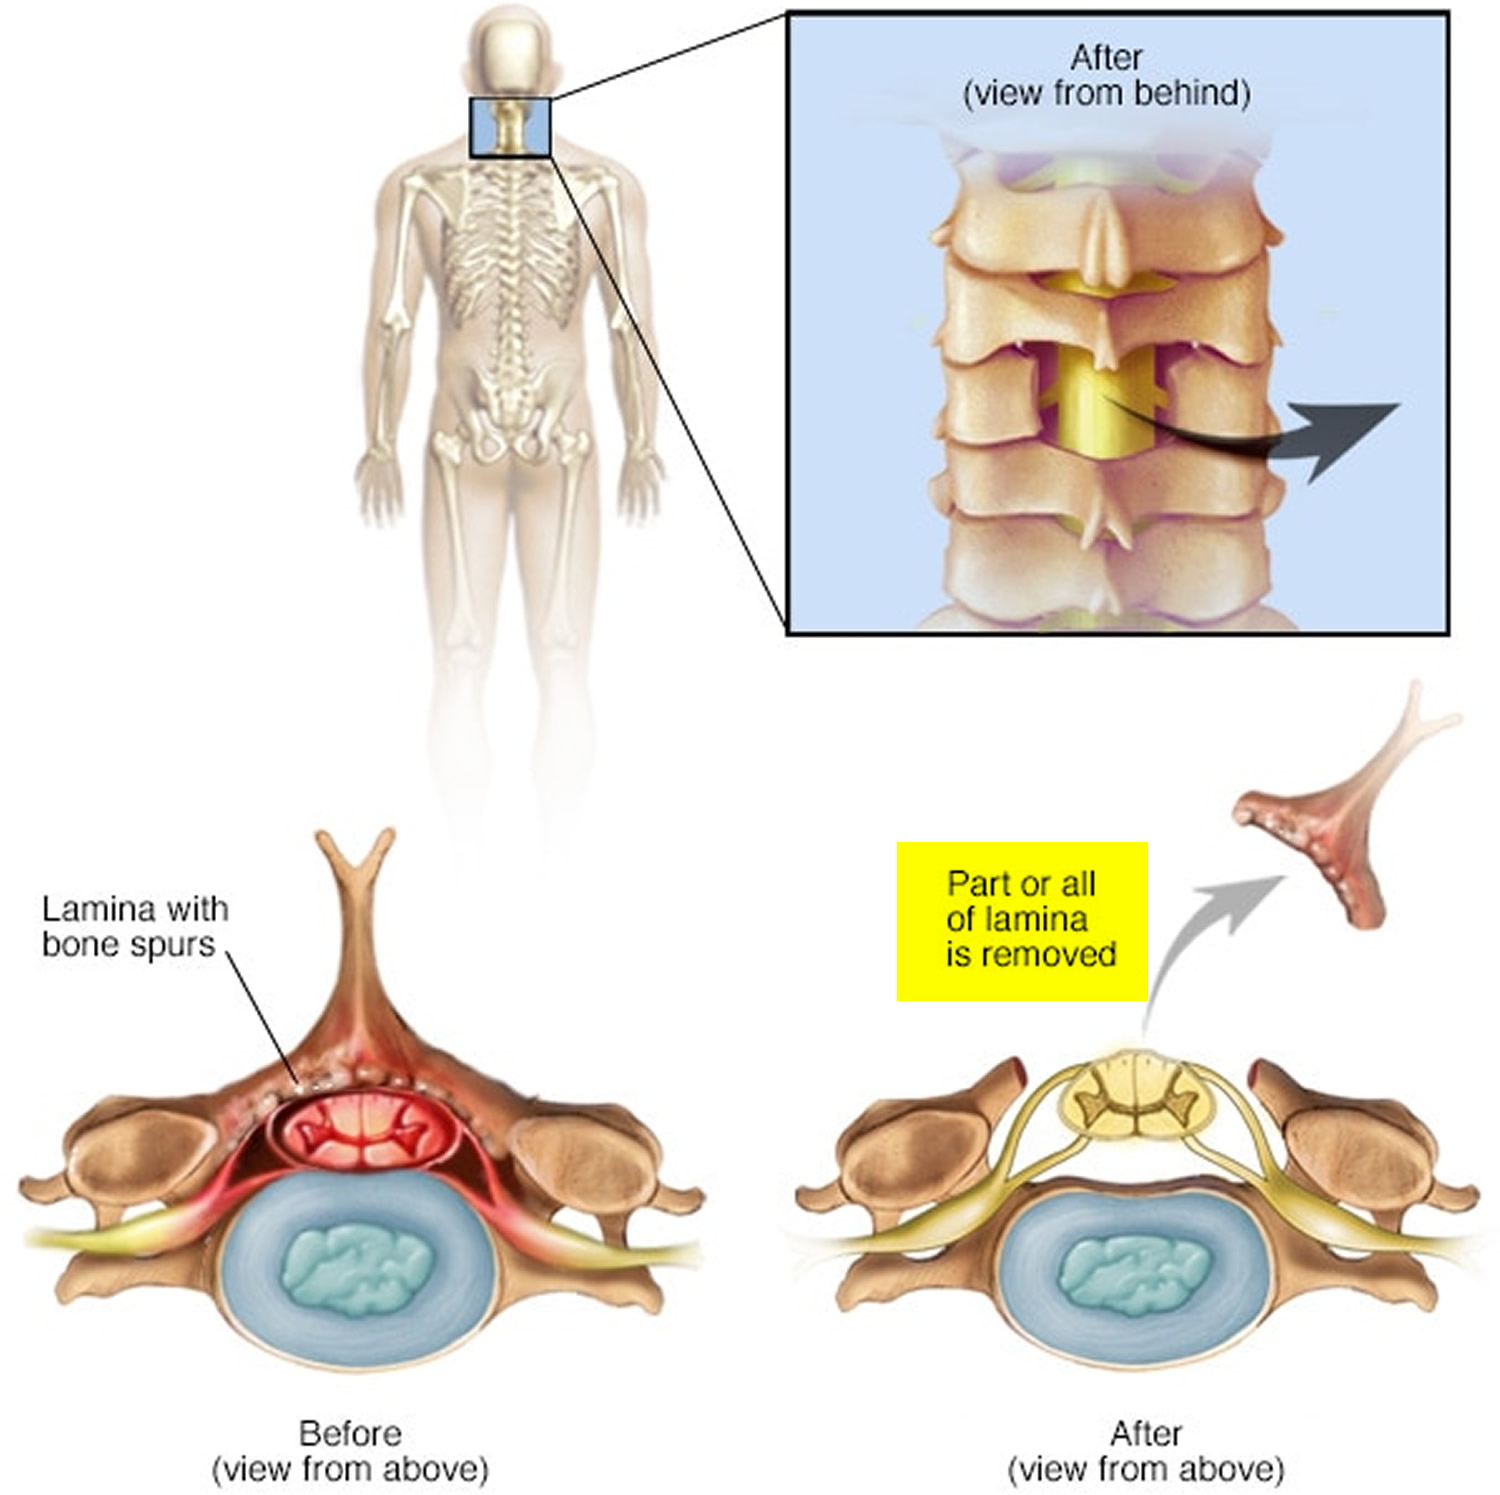 What is the downside of laminectomy?